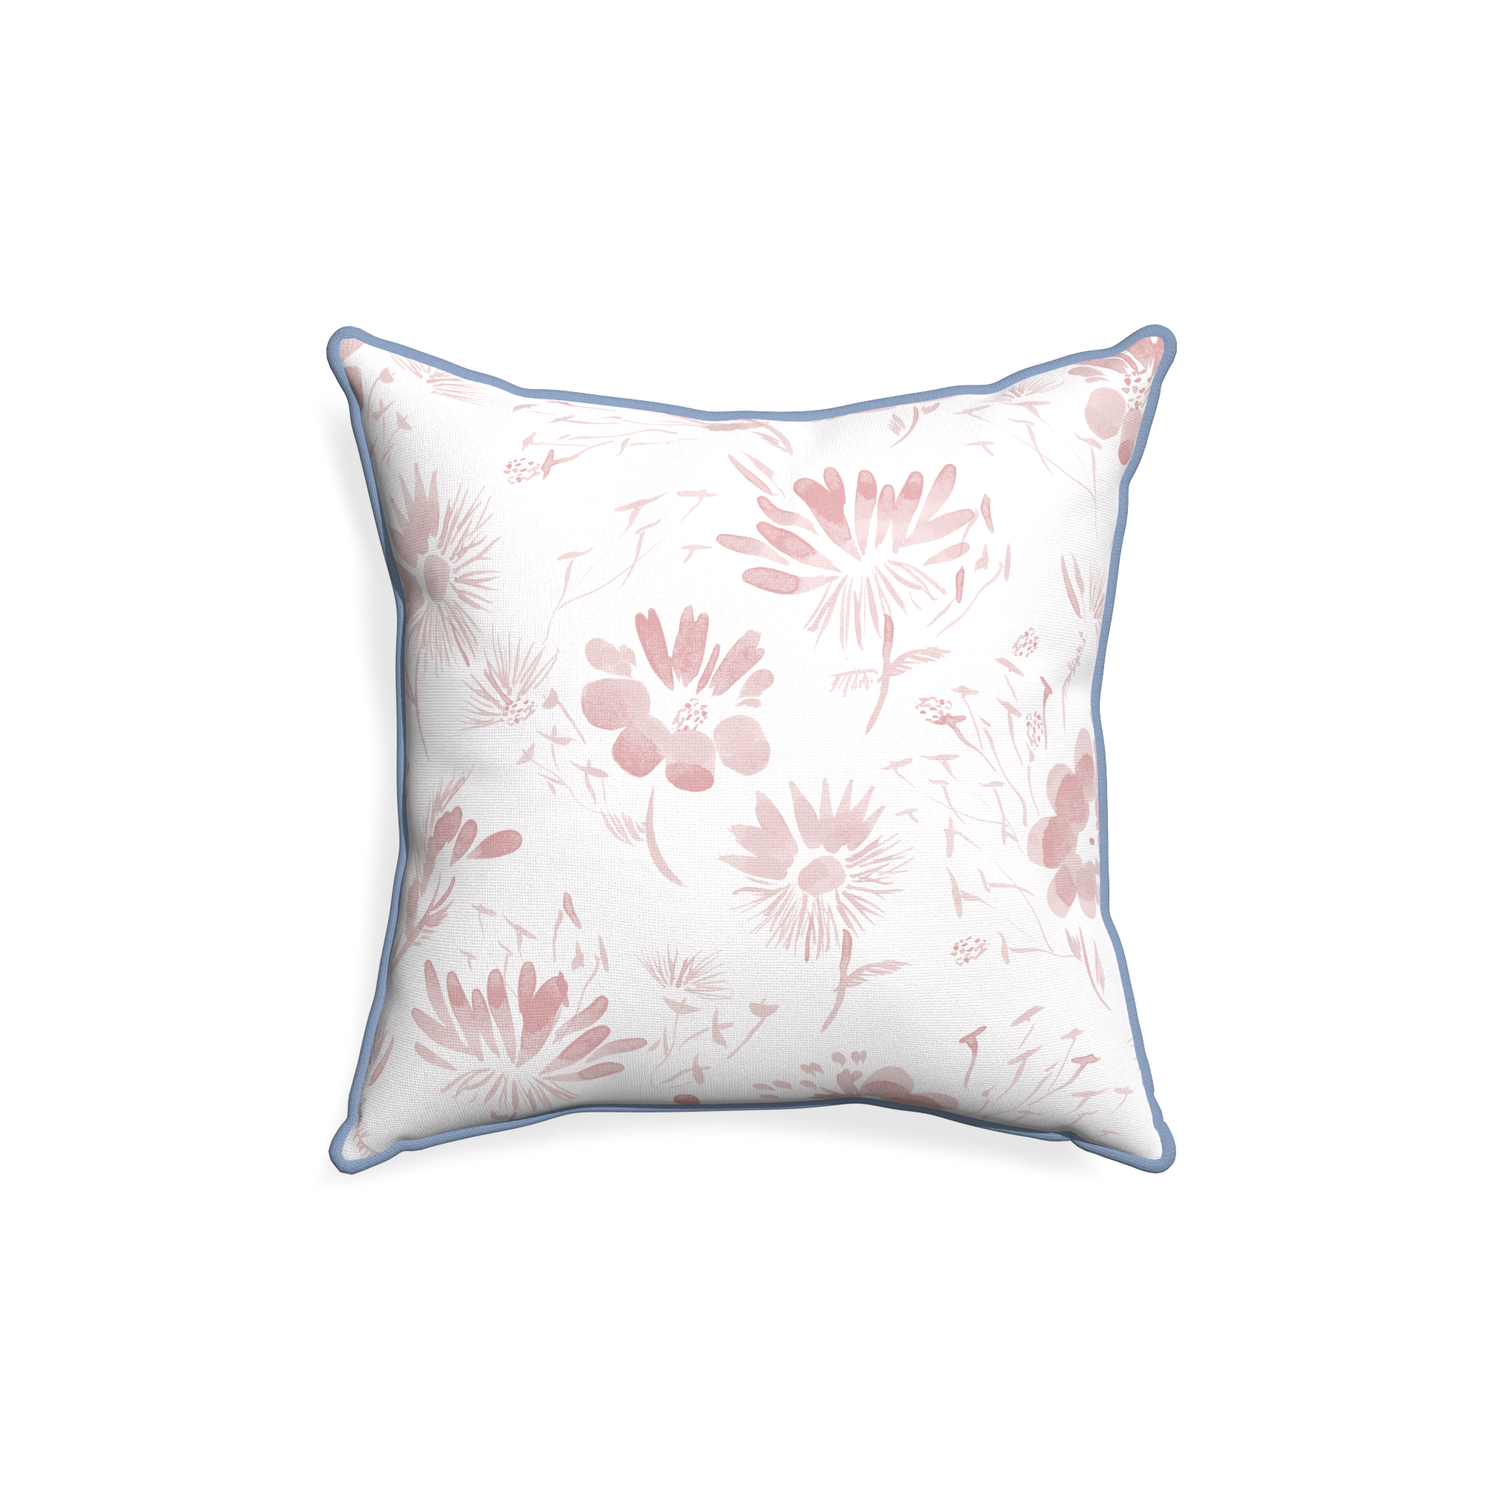 18-square blake custom pink floralpillow with sky piping on white background